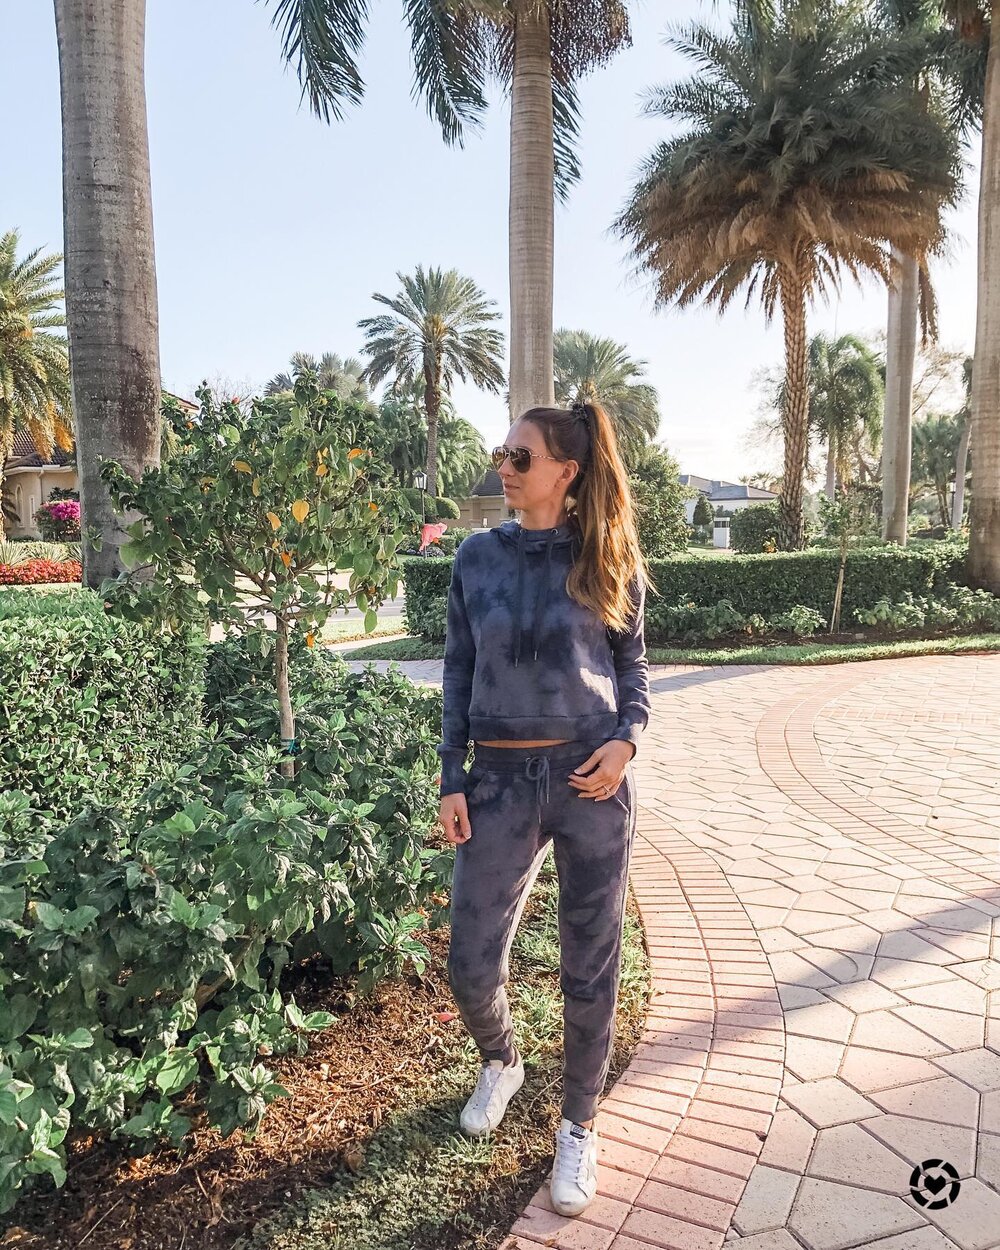 Further proof I&rsquo;m not built for the Northeast...anything below 70 means sweats for me. Anyone else crave the heat? ☀️

 Shop my daily looks by following me on the LIKEtoKNOW.it shopping app http://liketk.it/39VyN @liketoknow.it #liketkit #LTKSe